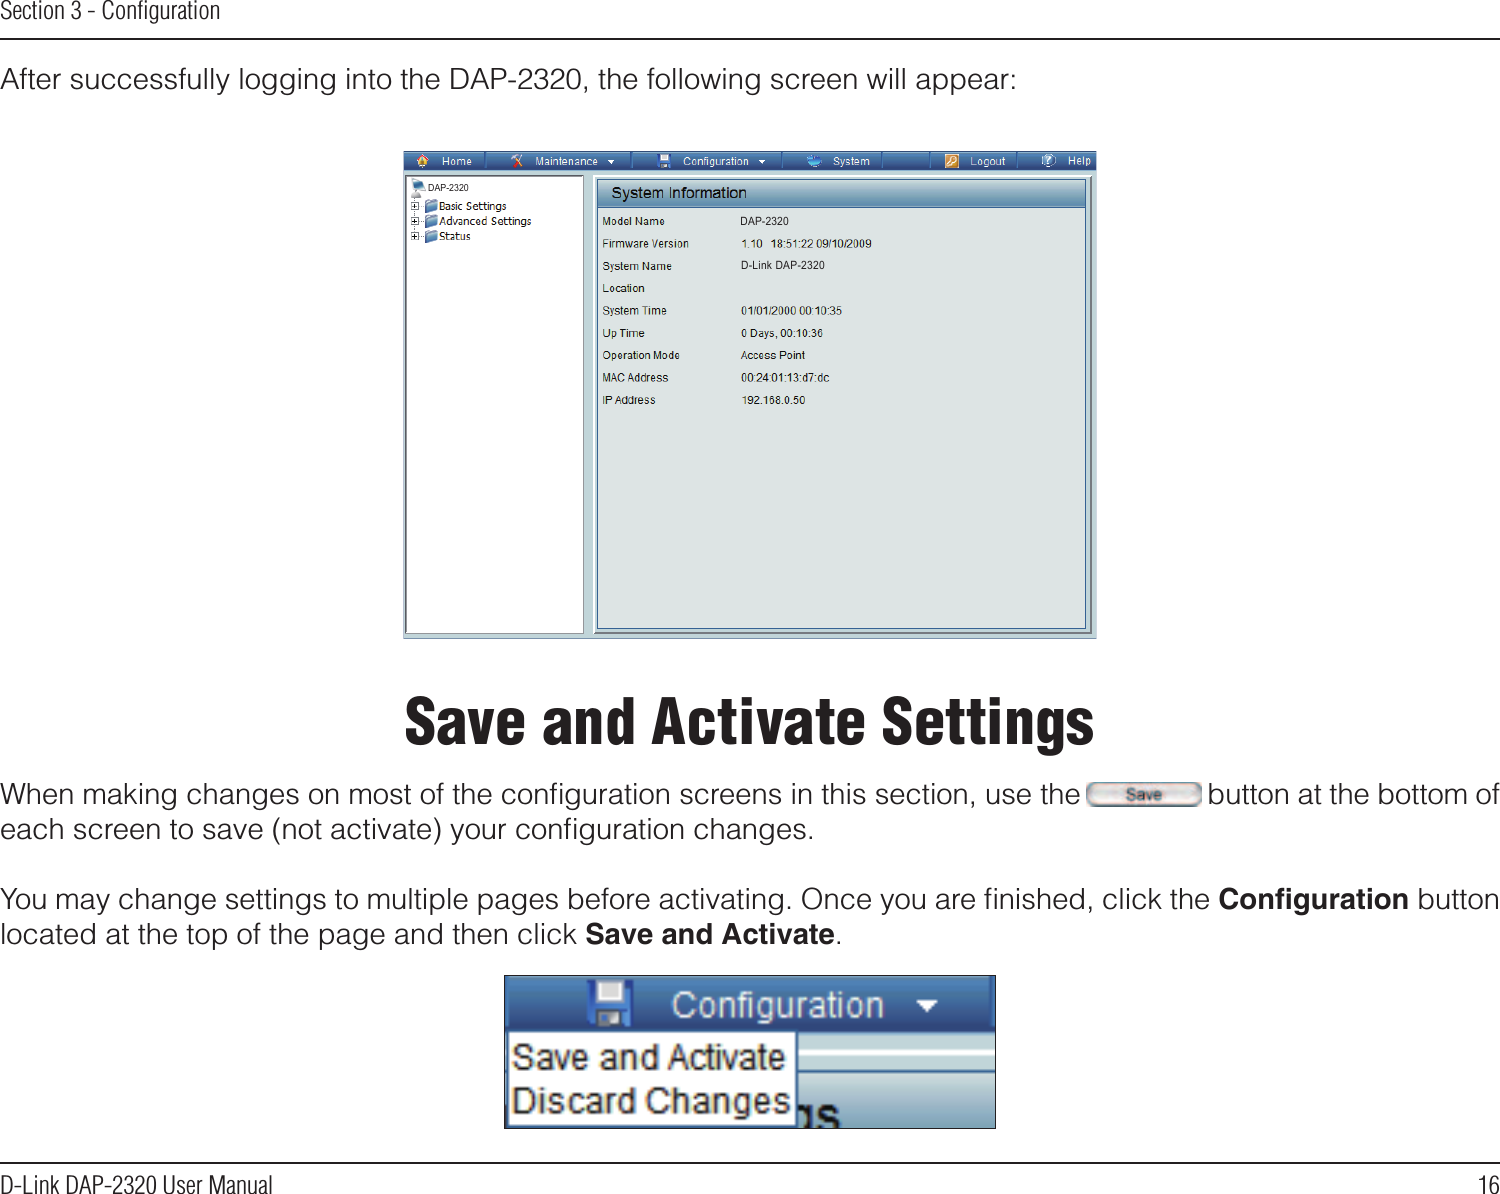 16D-Link DAP-2320 User ManualSection 3 - ConﬁgurationAfter successfully logging into the DAP-2320, the following screen will appear:When making changes on most of the conﬁguration screens in this section, use the      button at the bottom of each screen to save (not activate) your conﬁguration changes.You may change settings to multiple pages before activating. Once you are ﬁnished, click the Conguration button located at the top of the page and then click Save and Activate.Save and Activate SettingsDAP-2320DAP-2320D-Link DAP-2320